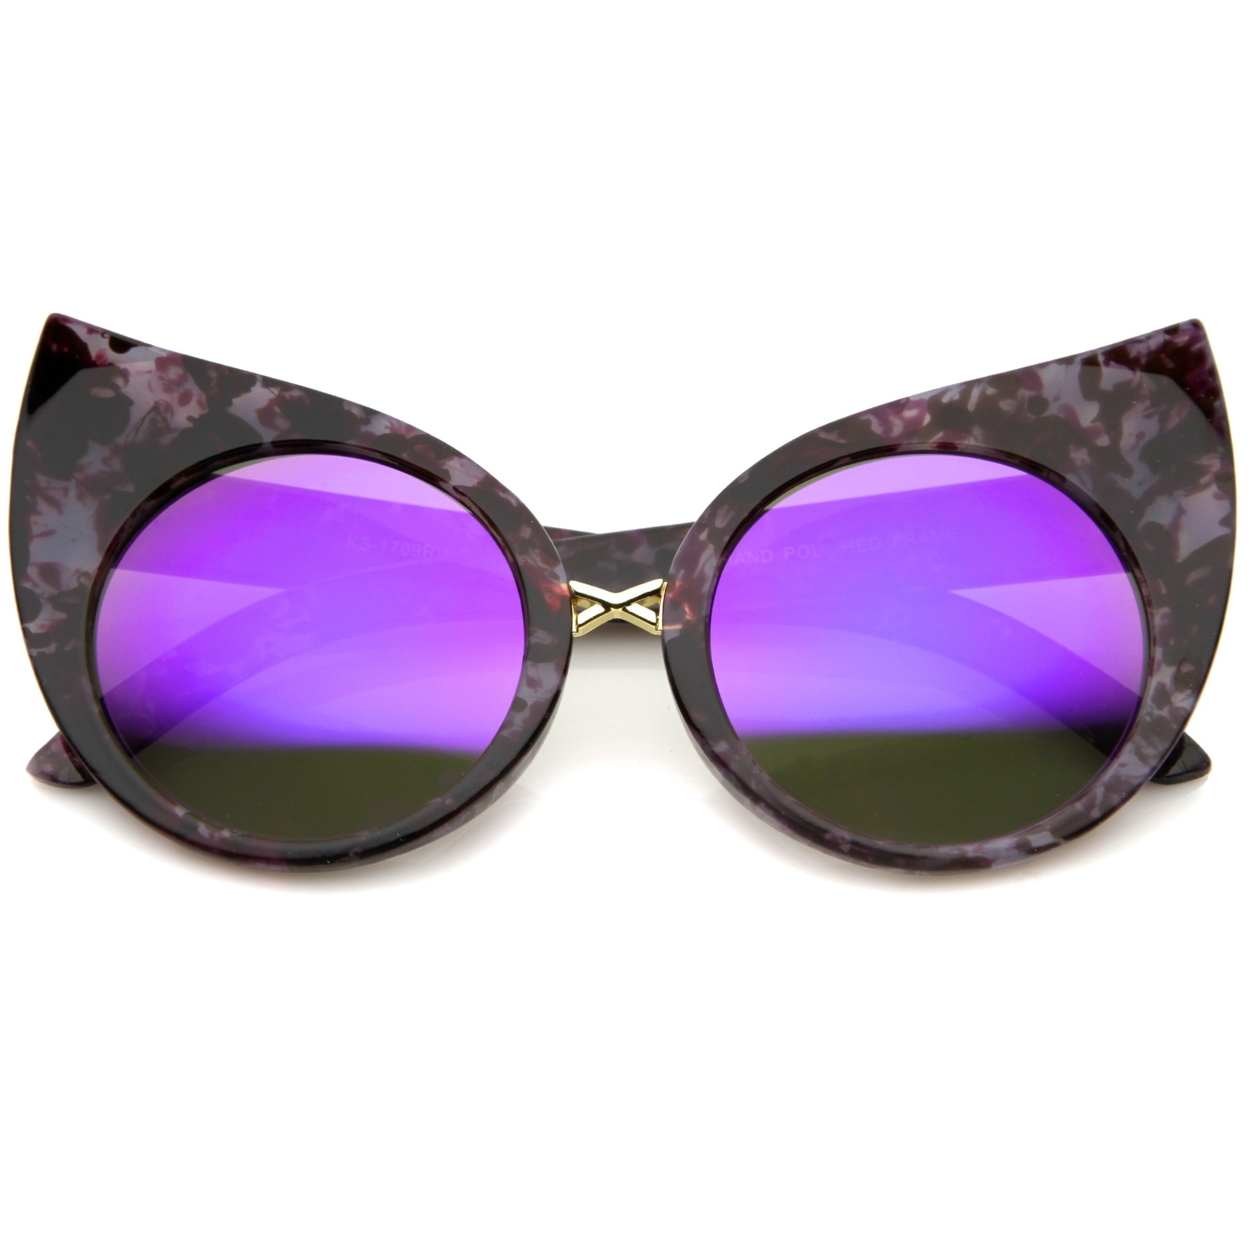 Womens Fashion Bold Marble Frame Mirrored Lens Round Cat Eye Sunglasses 51 mm - image 5 of 6